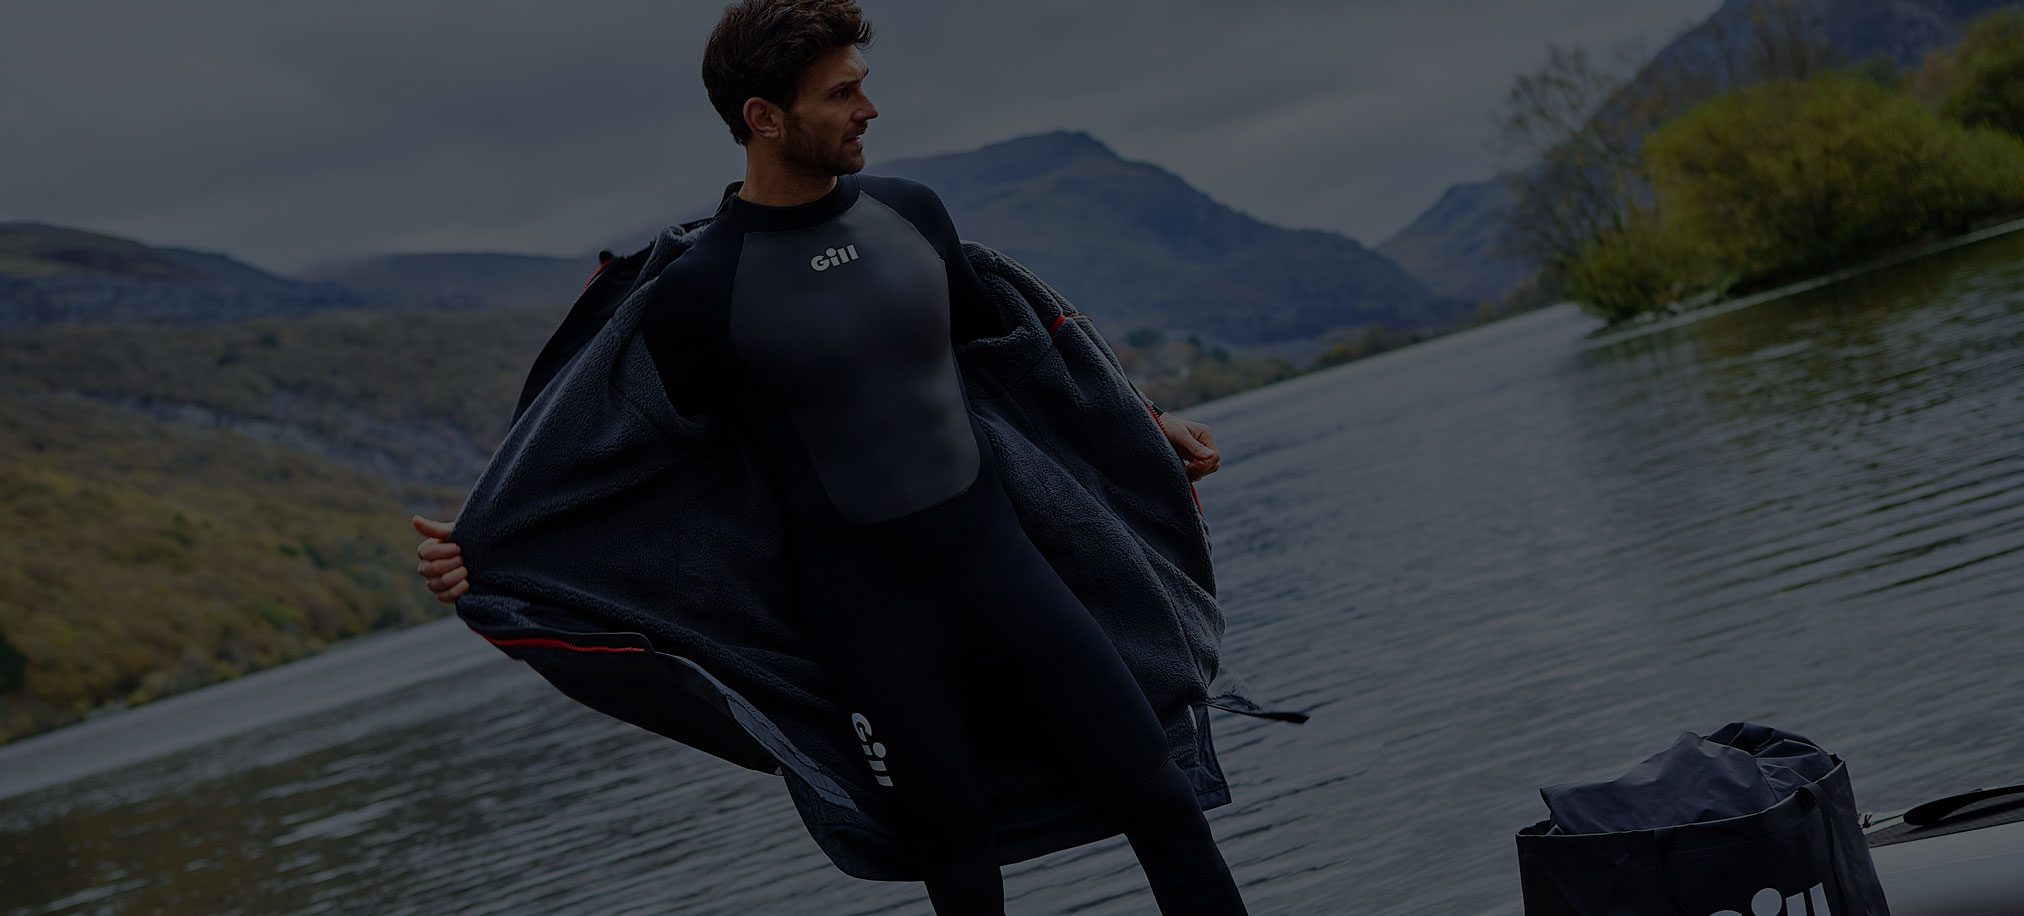 Gill_S2_22_Pursuit_Wetsuit_Lifestyle_Hero_1